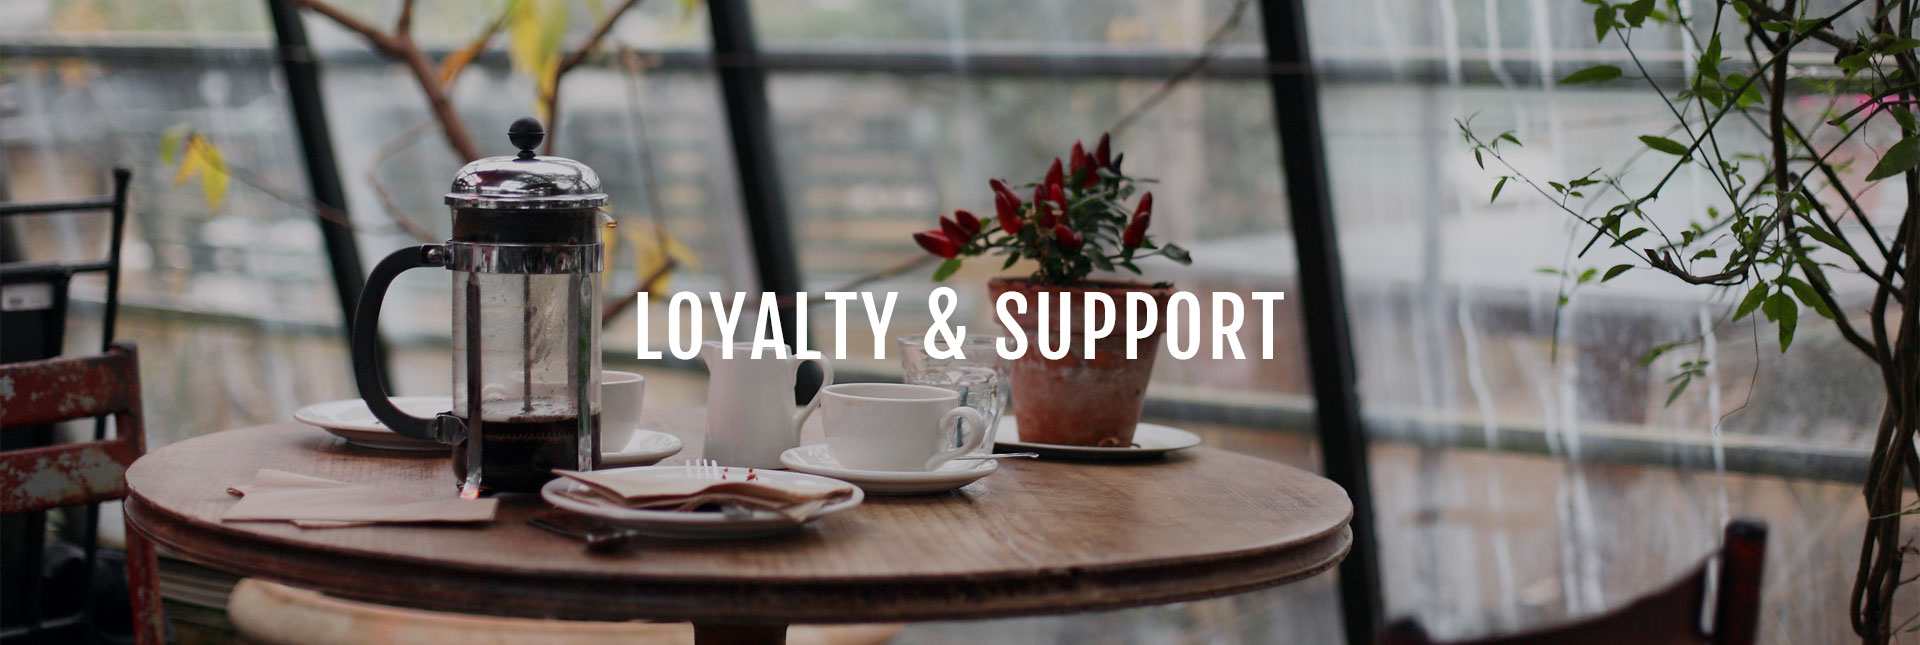 Loyalty and Support â€“ client log in 